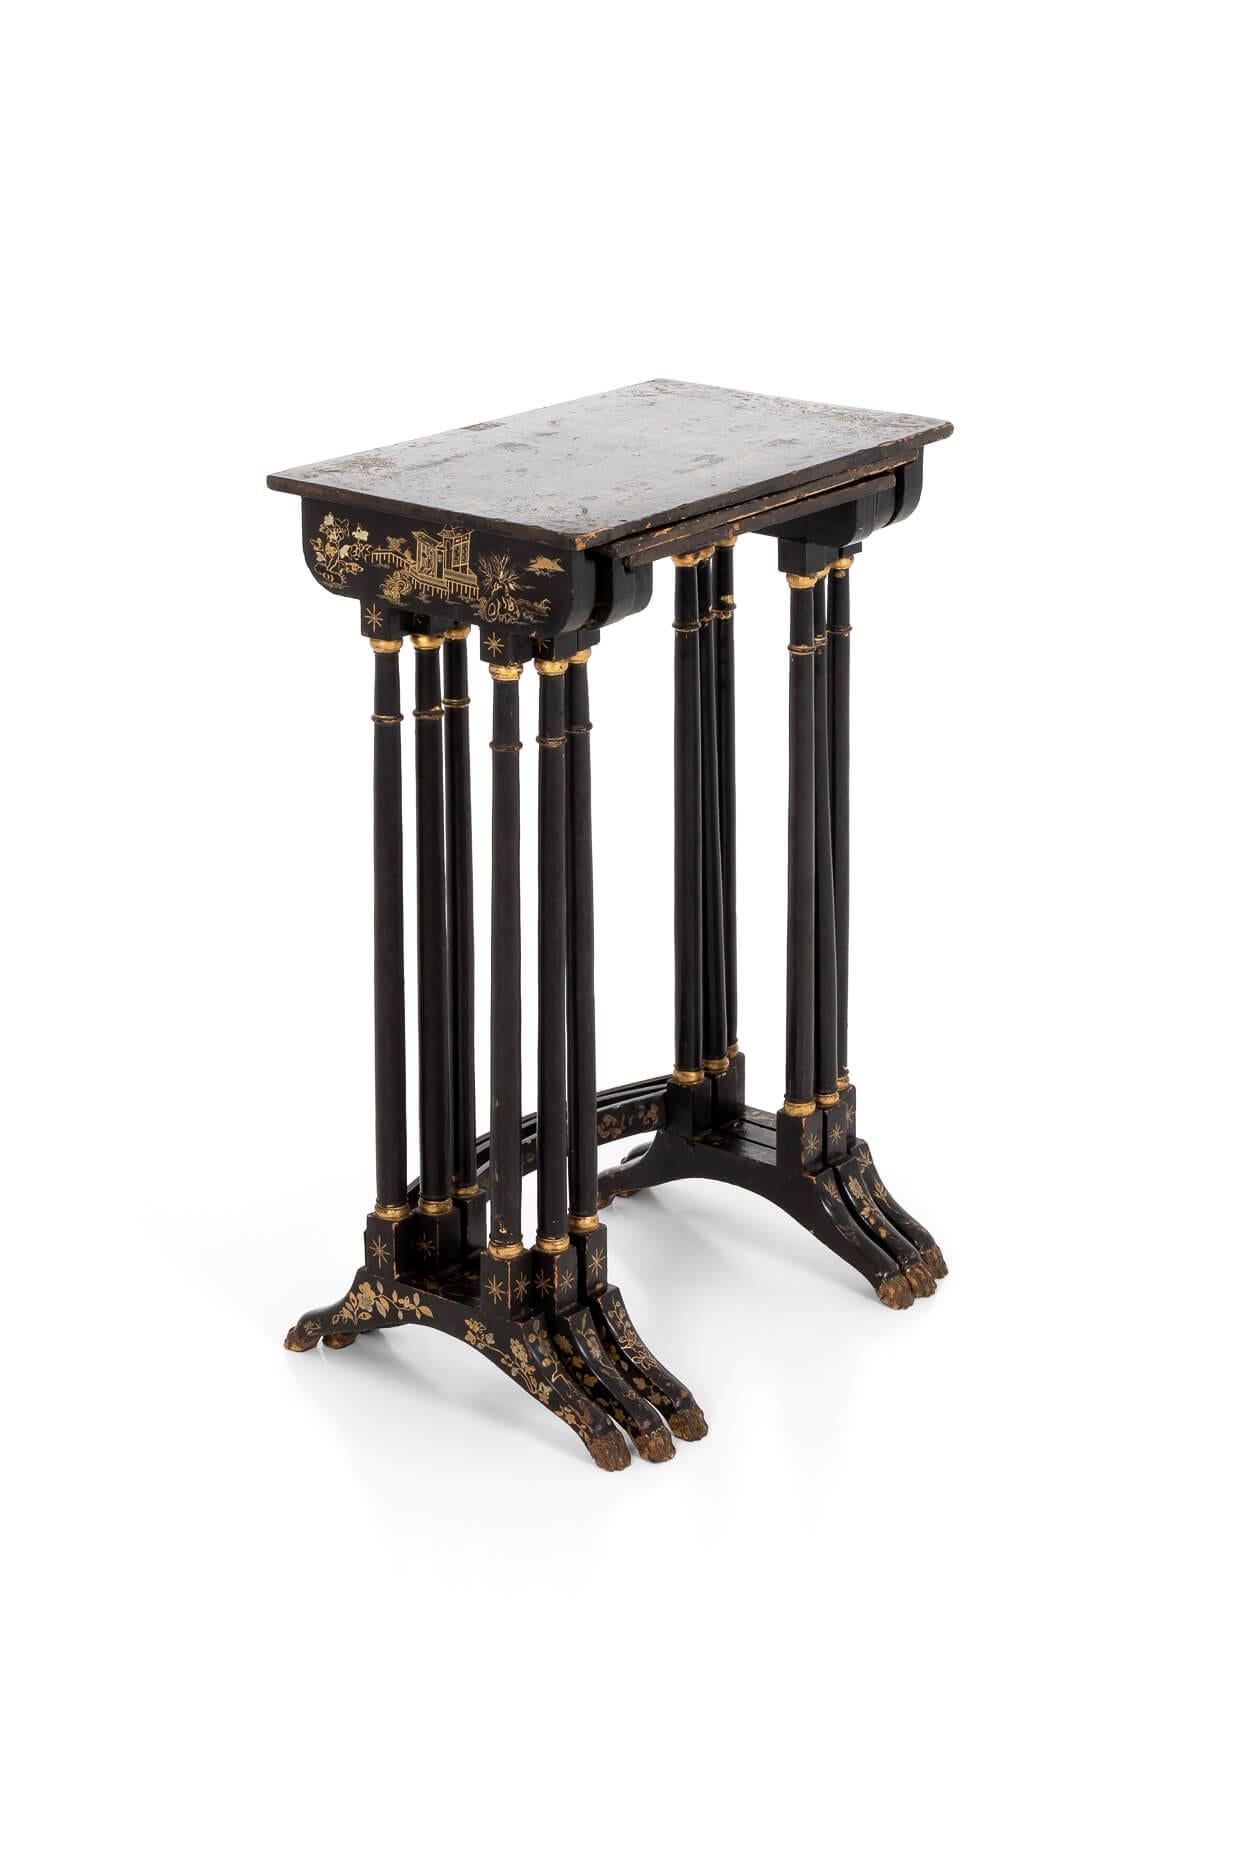 Japanned Nest of Three Regency Chinoiserie Gilt And Black Lacquer Tables, circa 1815 For Sale